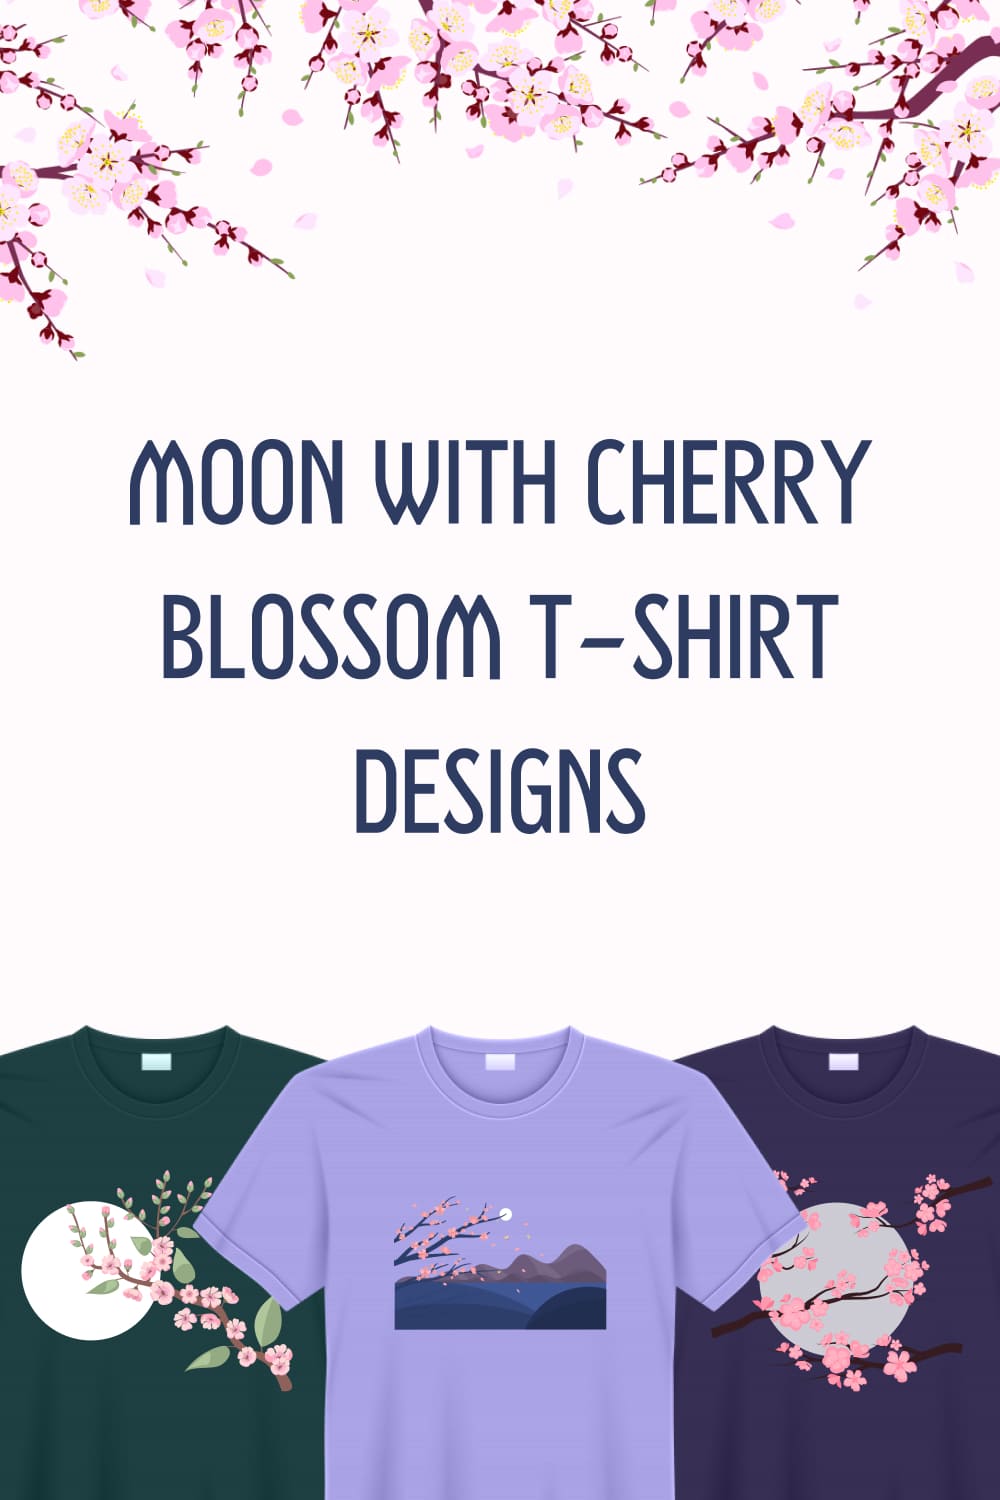 Moon with cherry blossom t shirt designs images of pinterest.